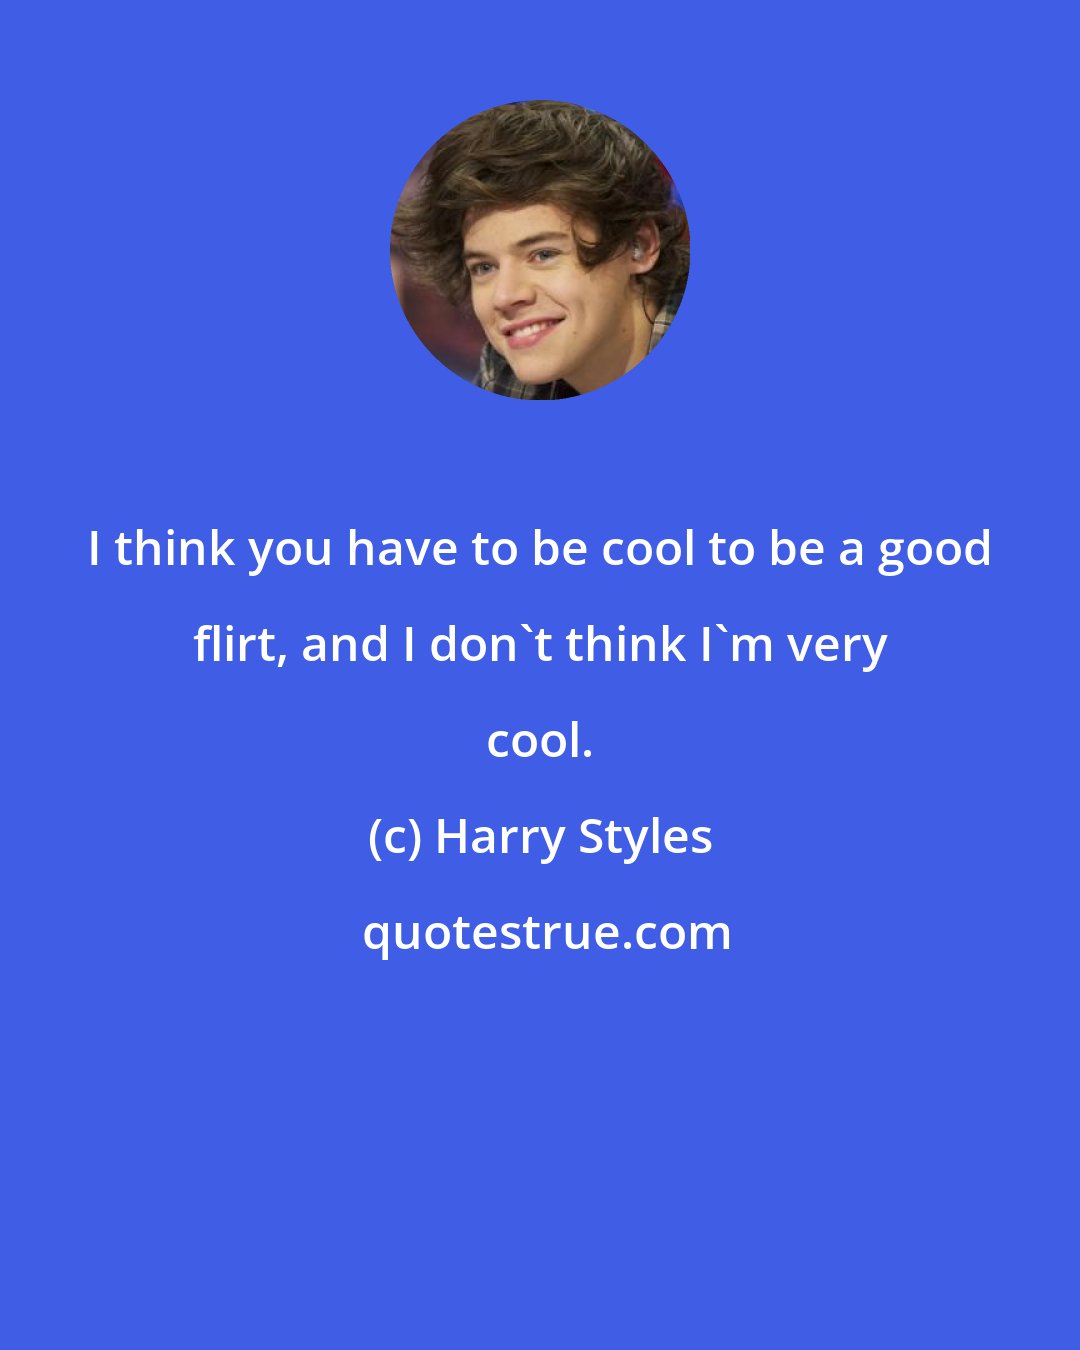 Harry Styles: I think you have to be cool to be a good flirt, and I don't think I'm very cool.